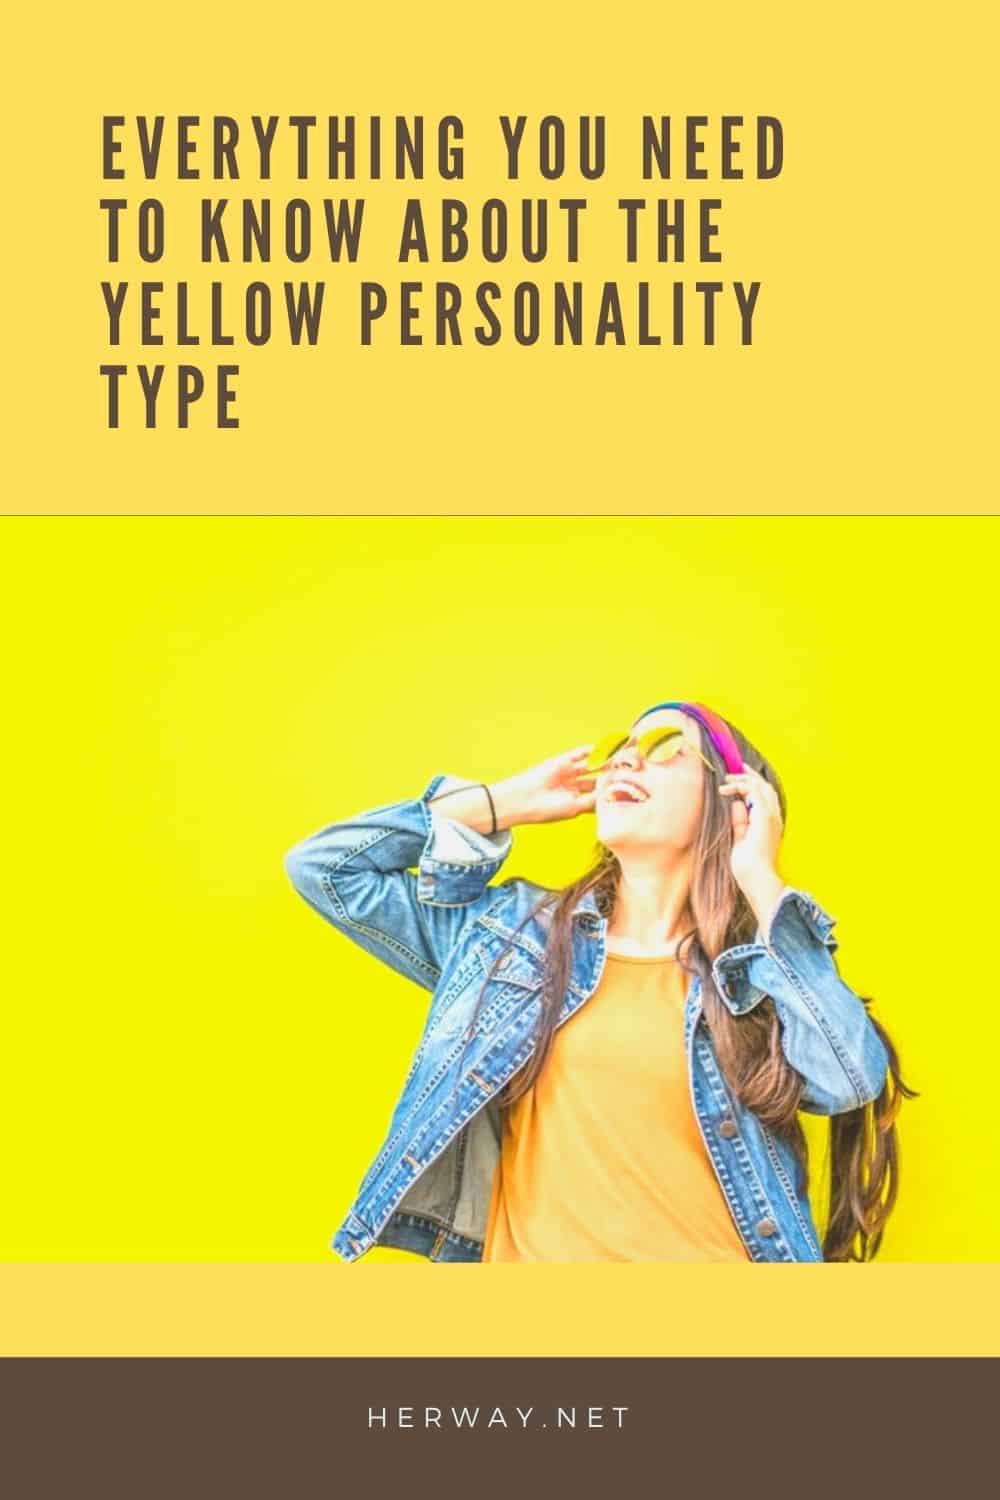 The Yellow Personality Type